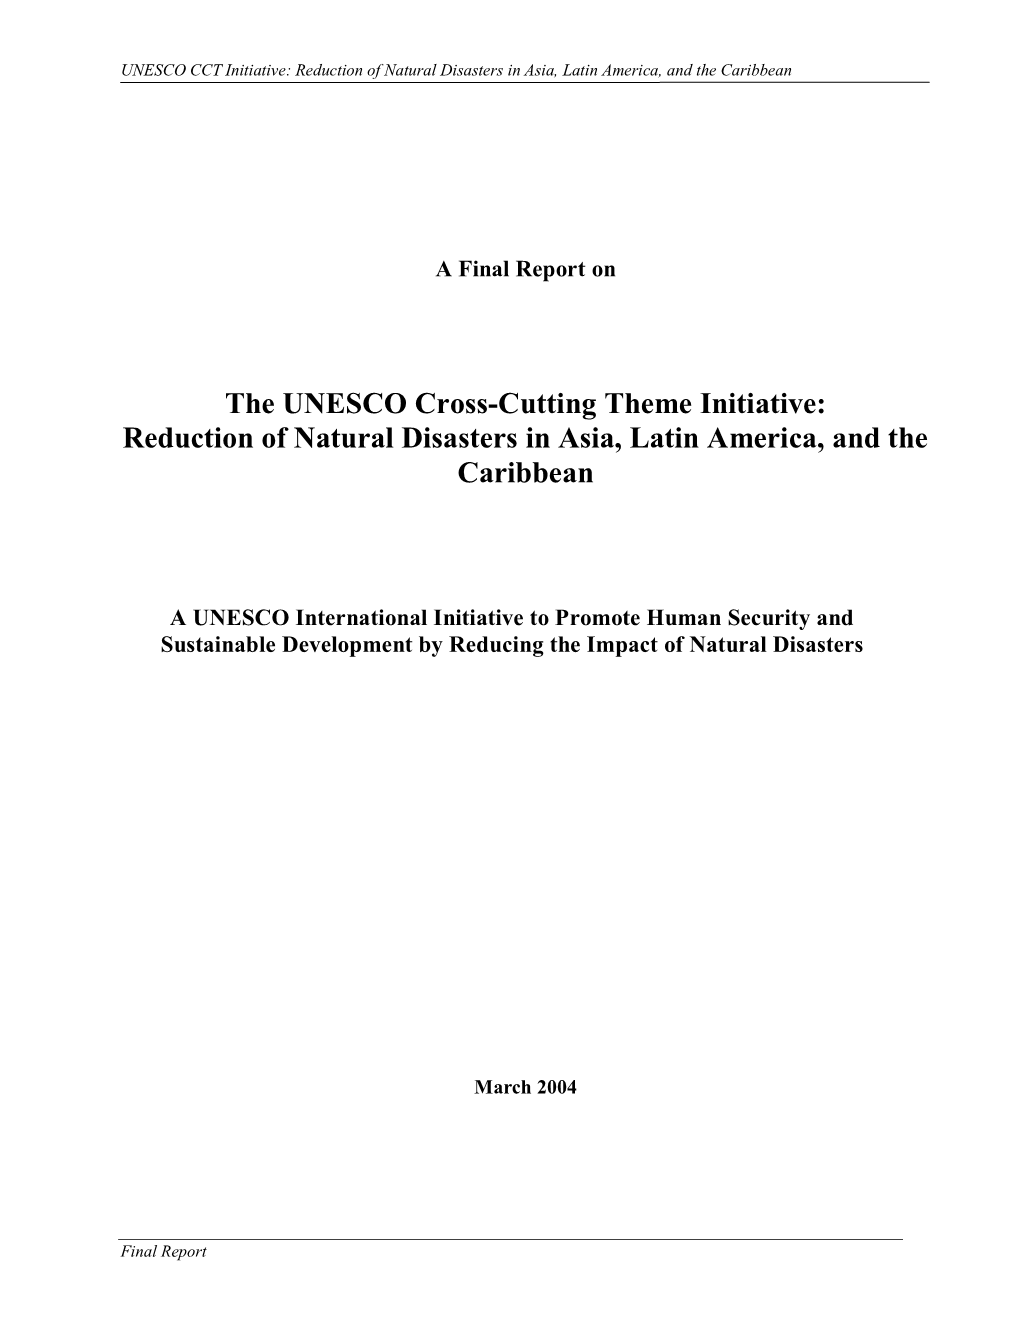 The UNESCO Cross-Cutting Theme Initiative: Reduction of Natural Disasters in Asia, Latin America, and the Caribbean